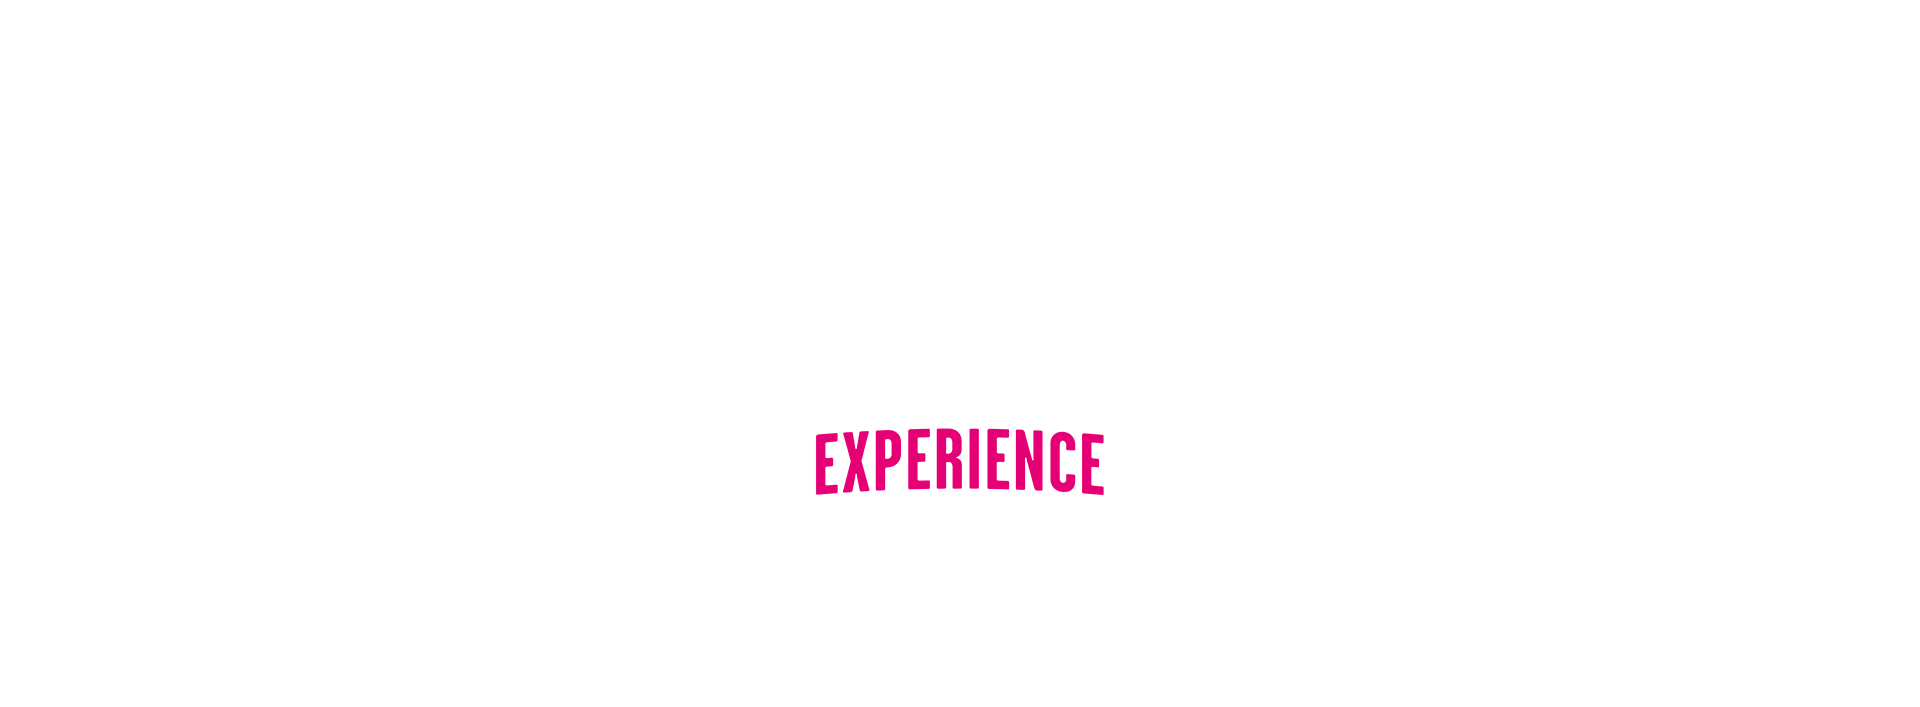 Holmes Comes Home To Baker Street